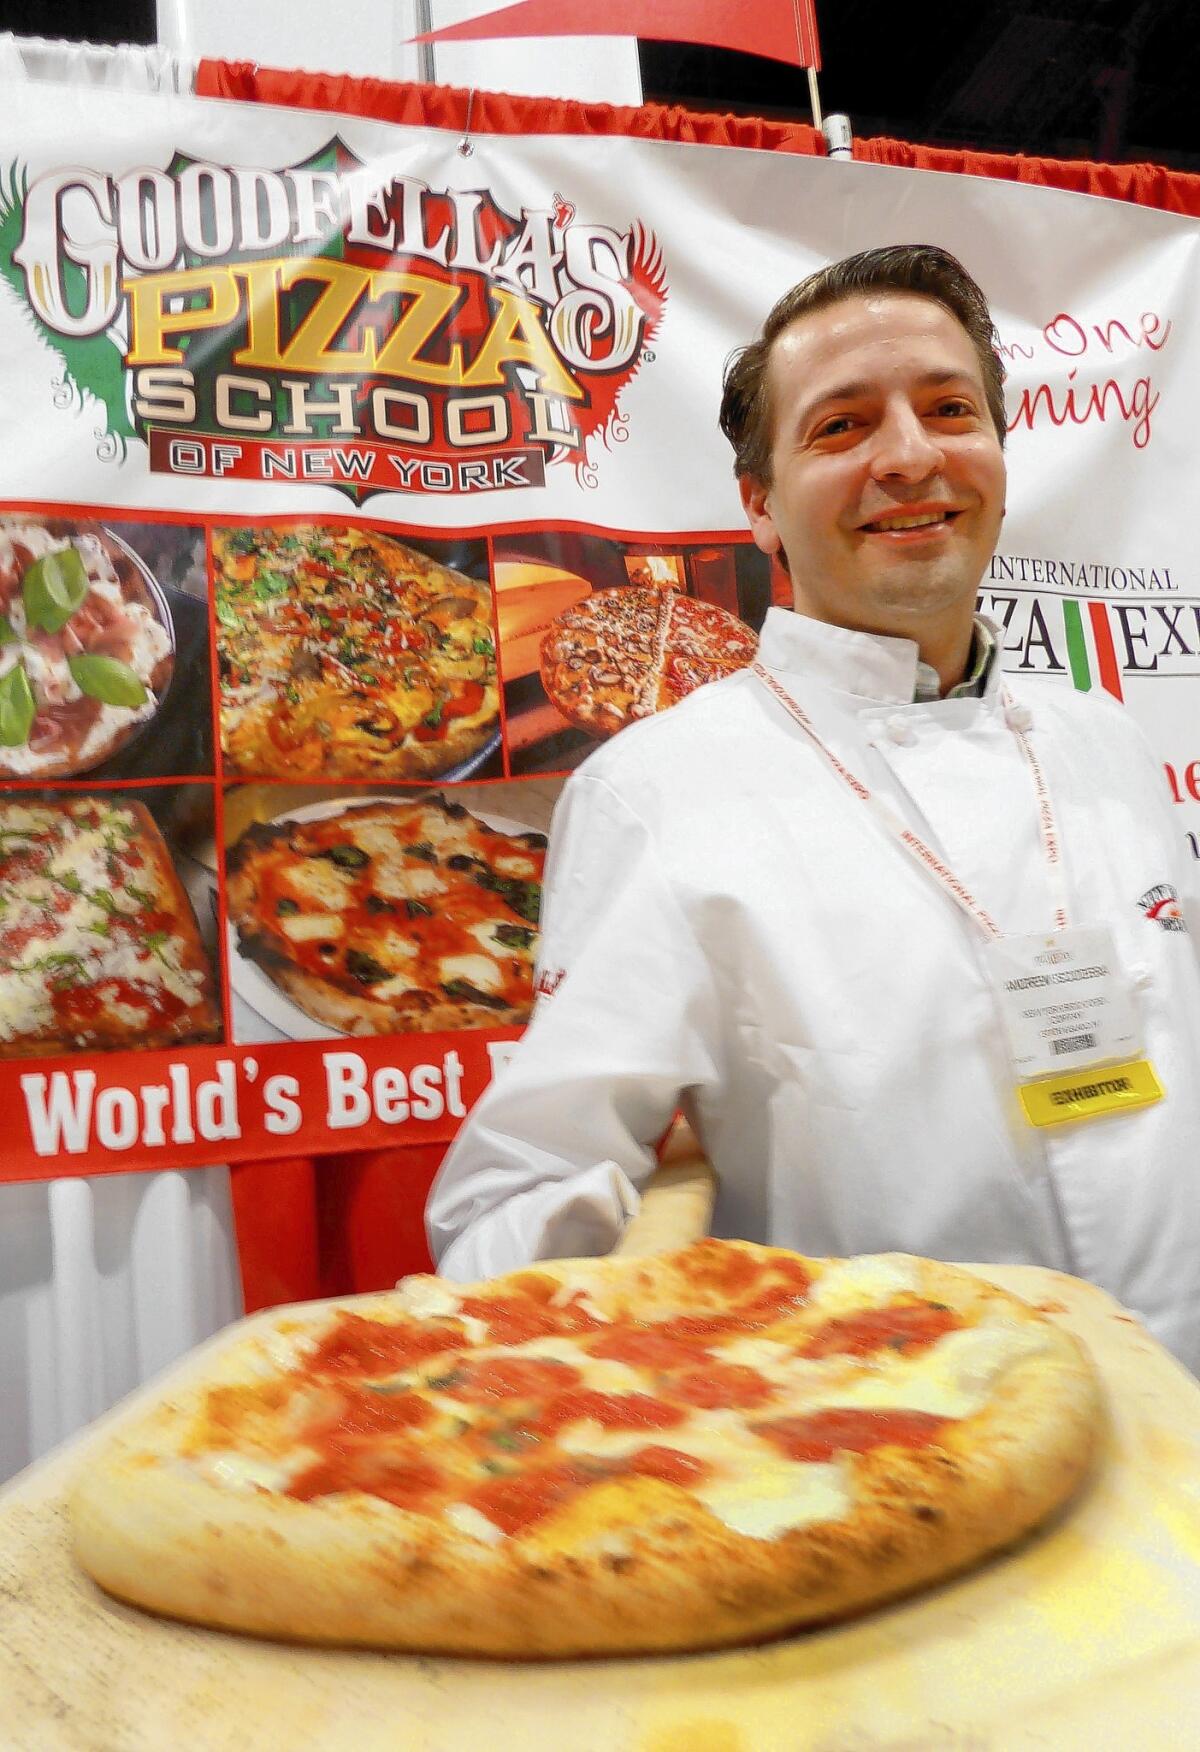 Andrew Scudera, a cook from Goodfellas Pizza School of New York, takes a fresh pie from the oven for the throngs to sample at the International Pizza Expo in Las Vegas.